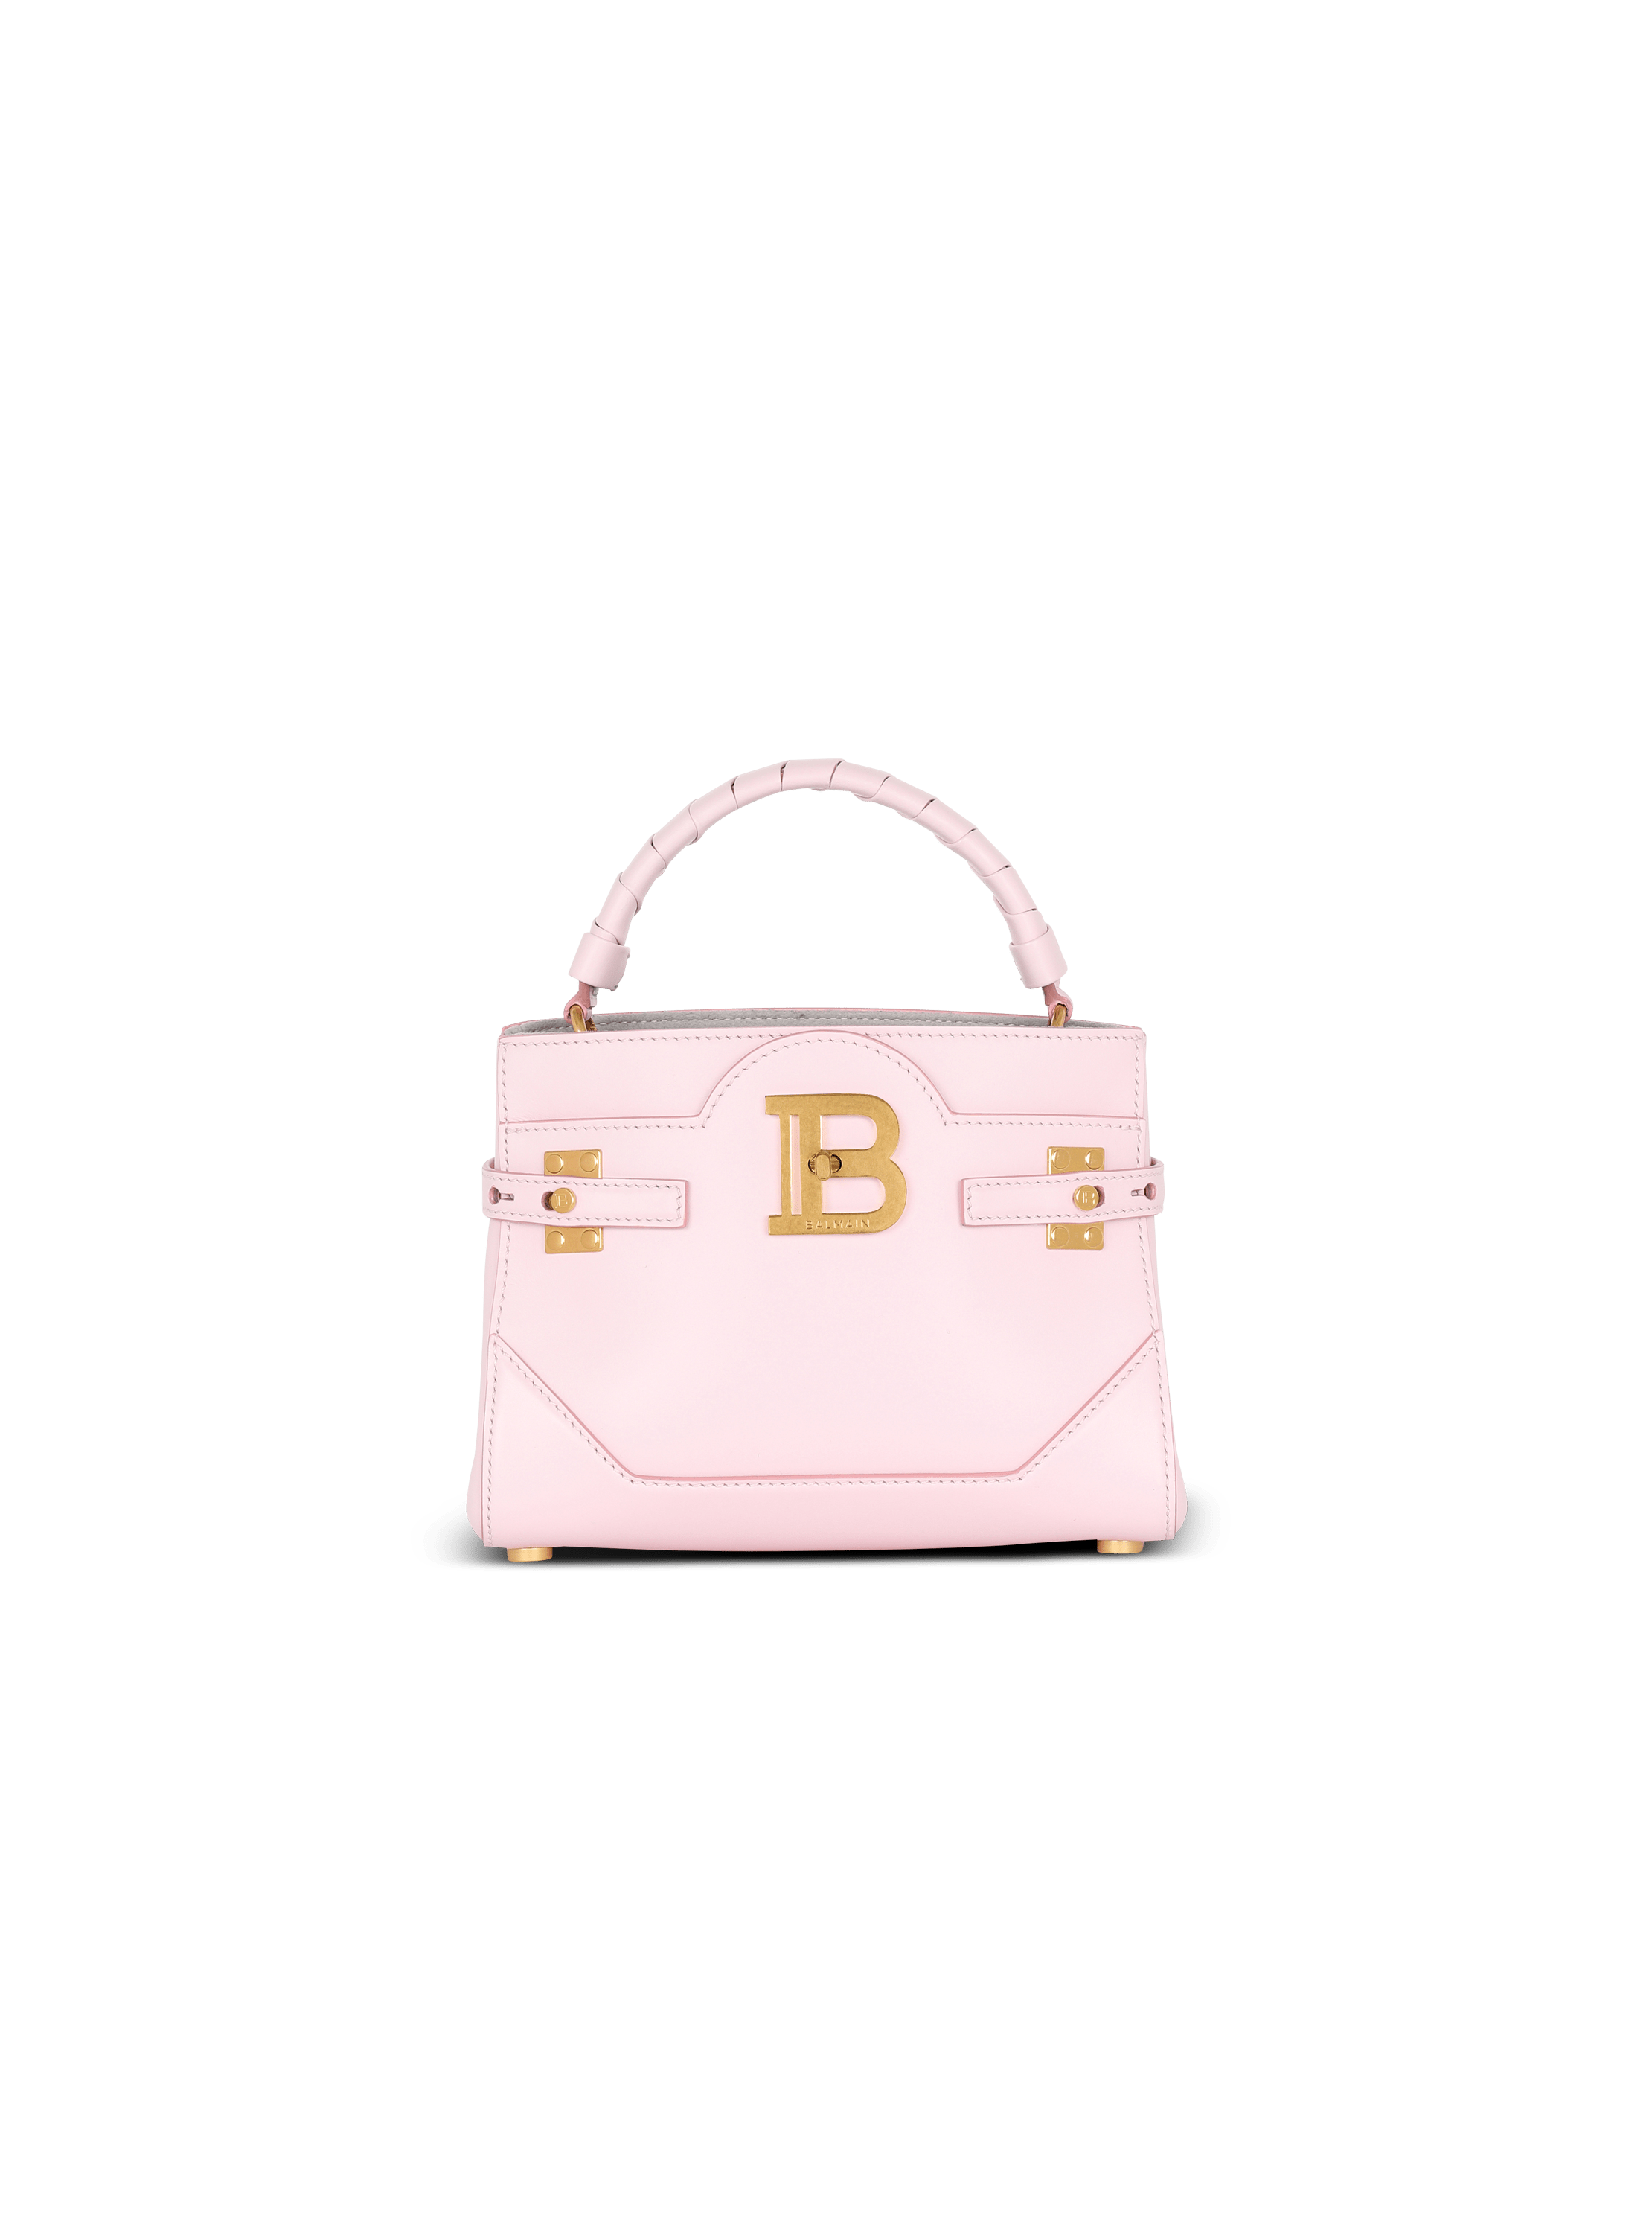 B-Buzz 22 leather top-handle bag